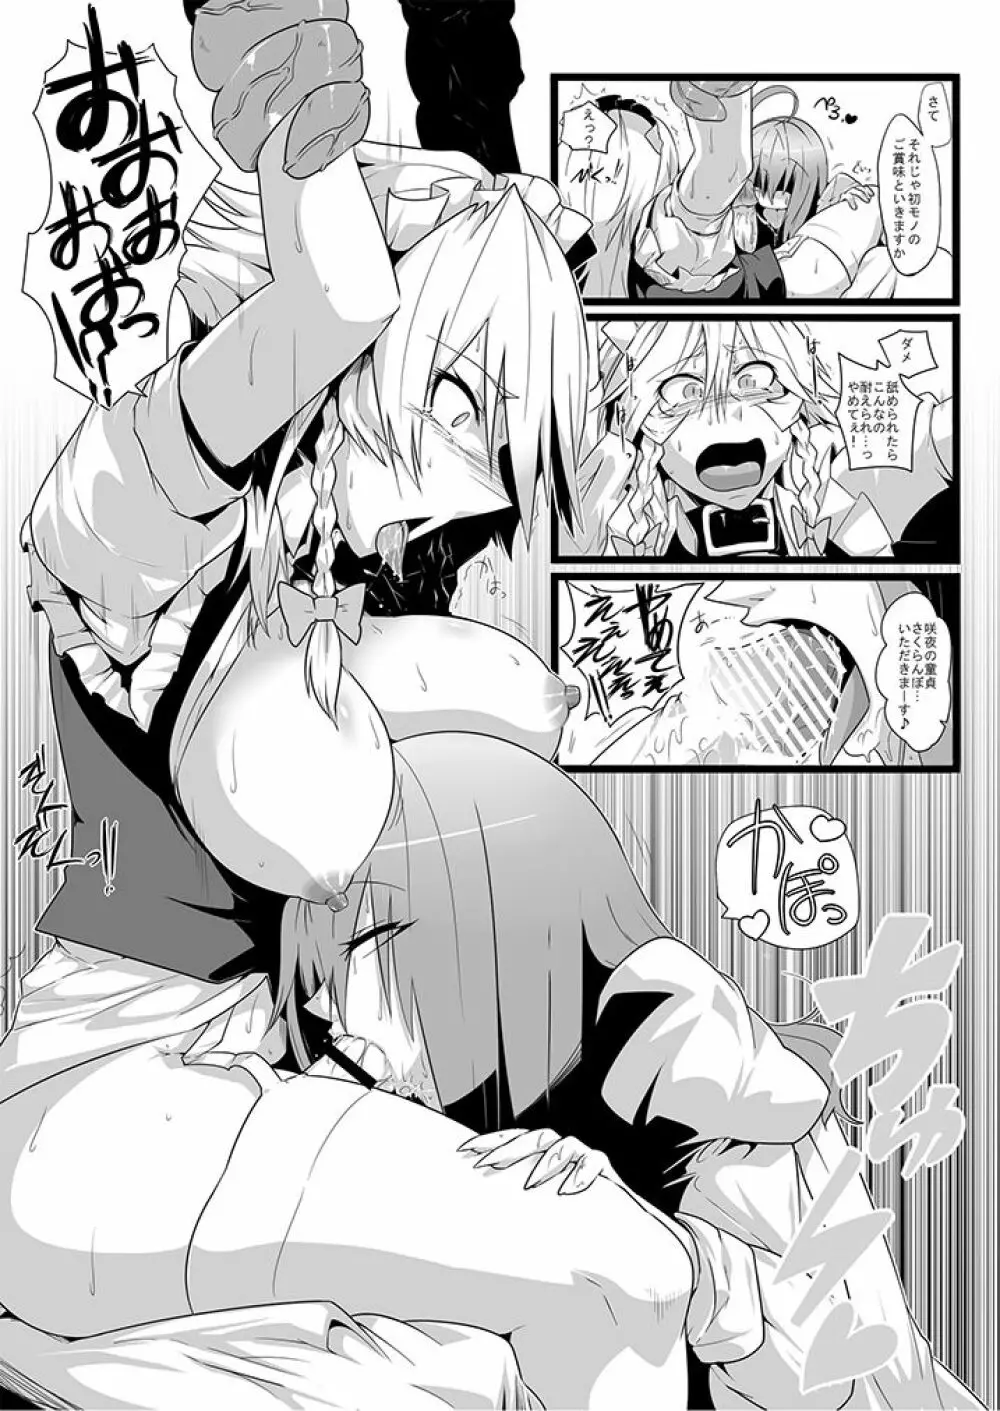 SAKUYA MAID in HEAVEN/ALL IN 1 - page211